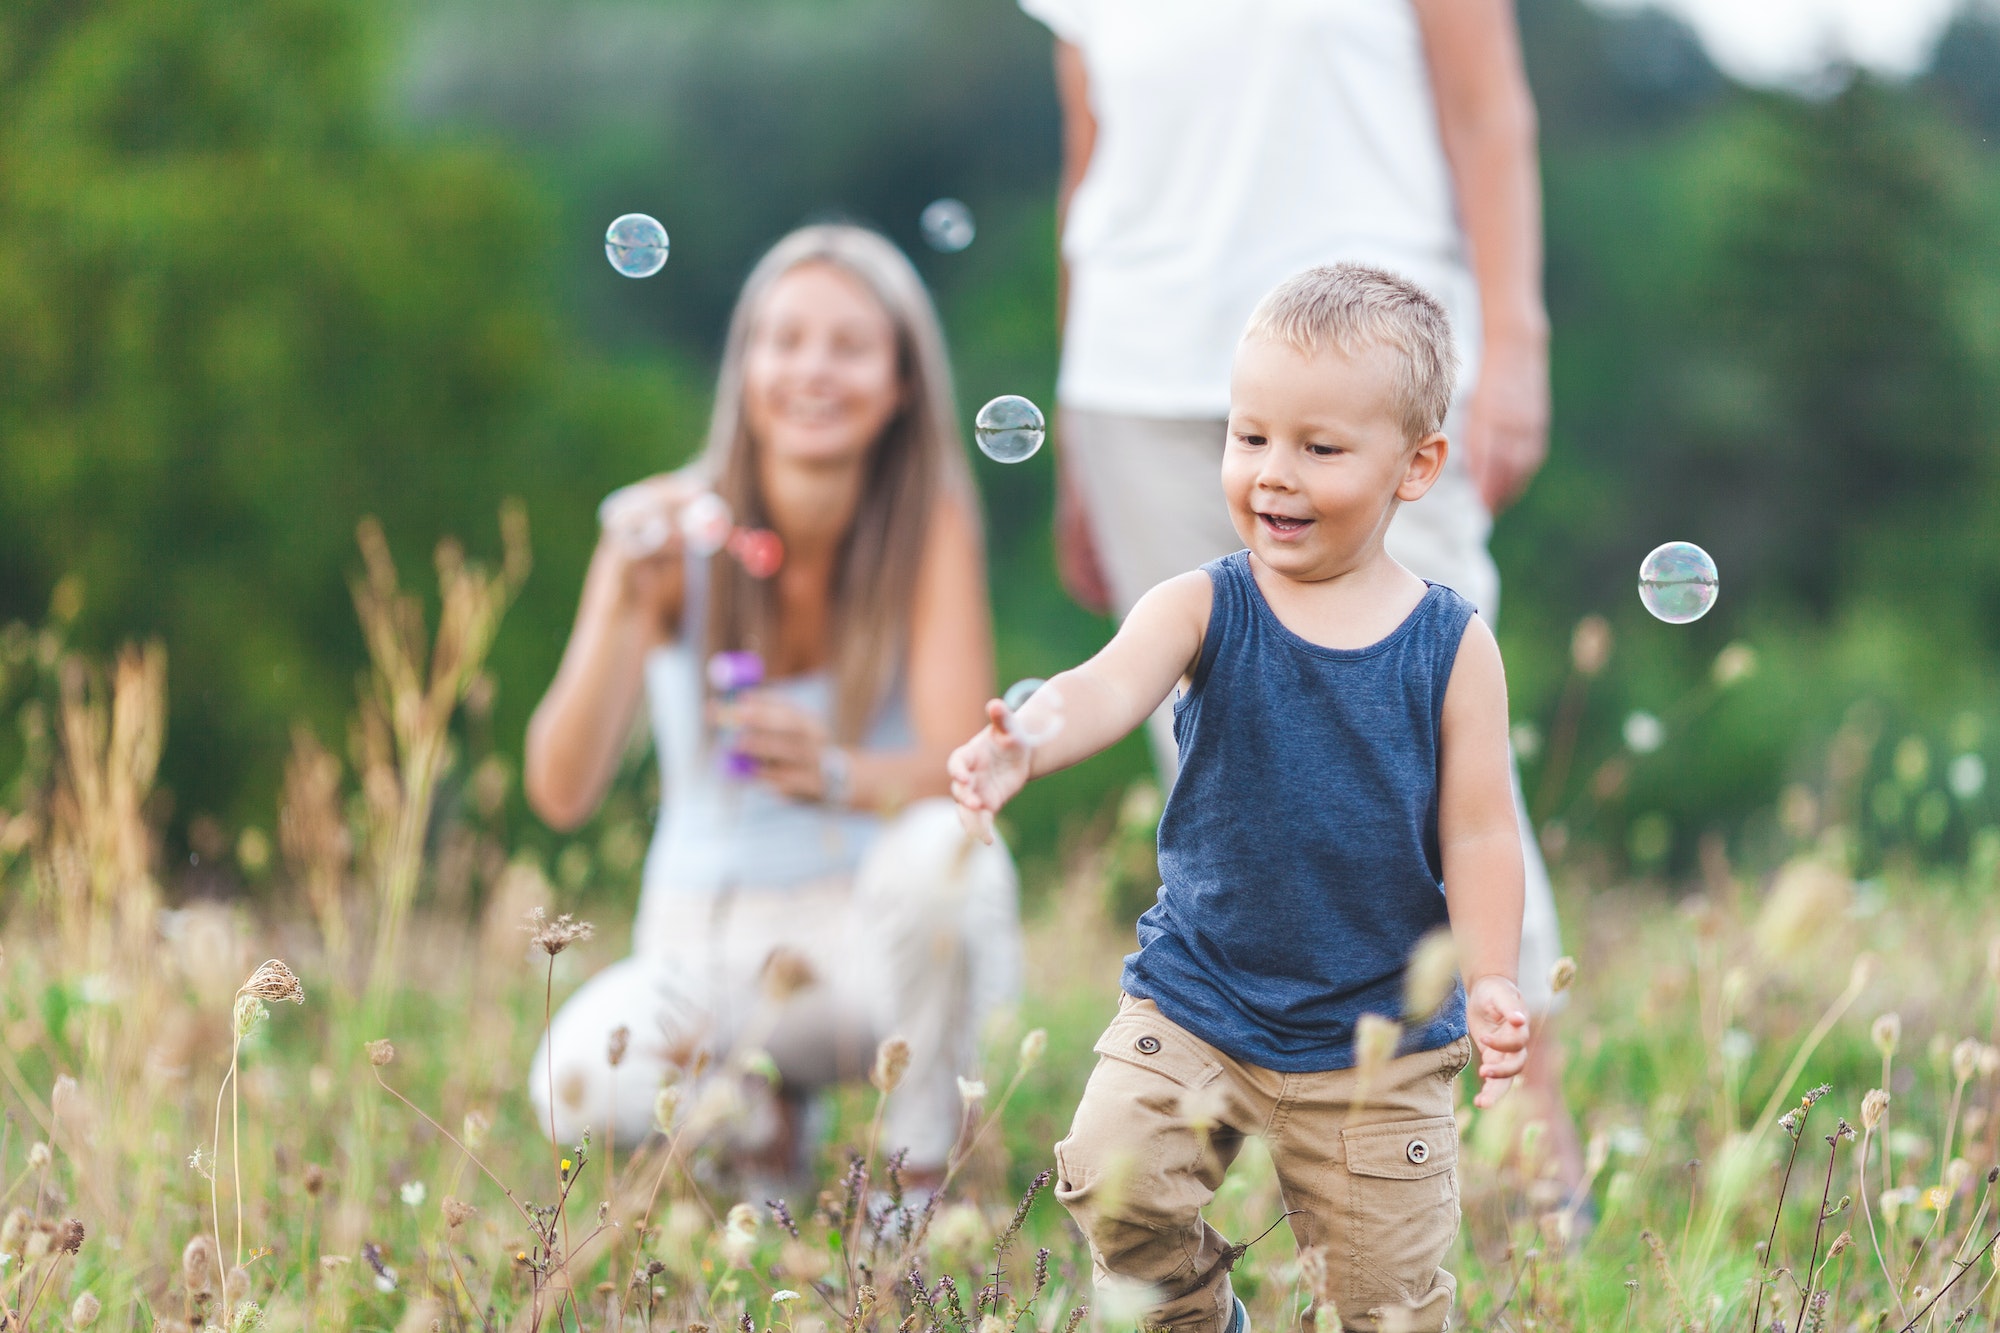 Happy child with family having a great time blowing bubbles